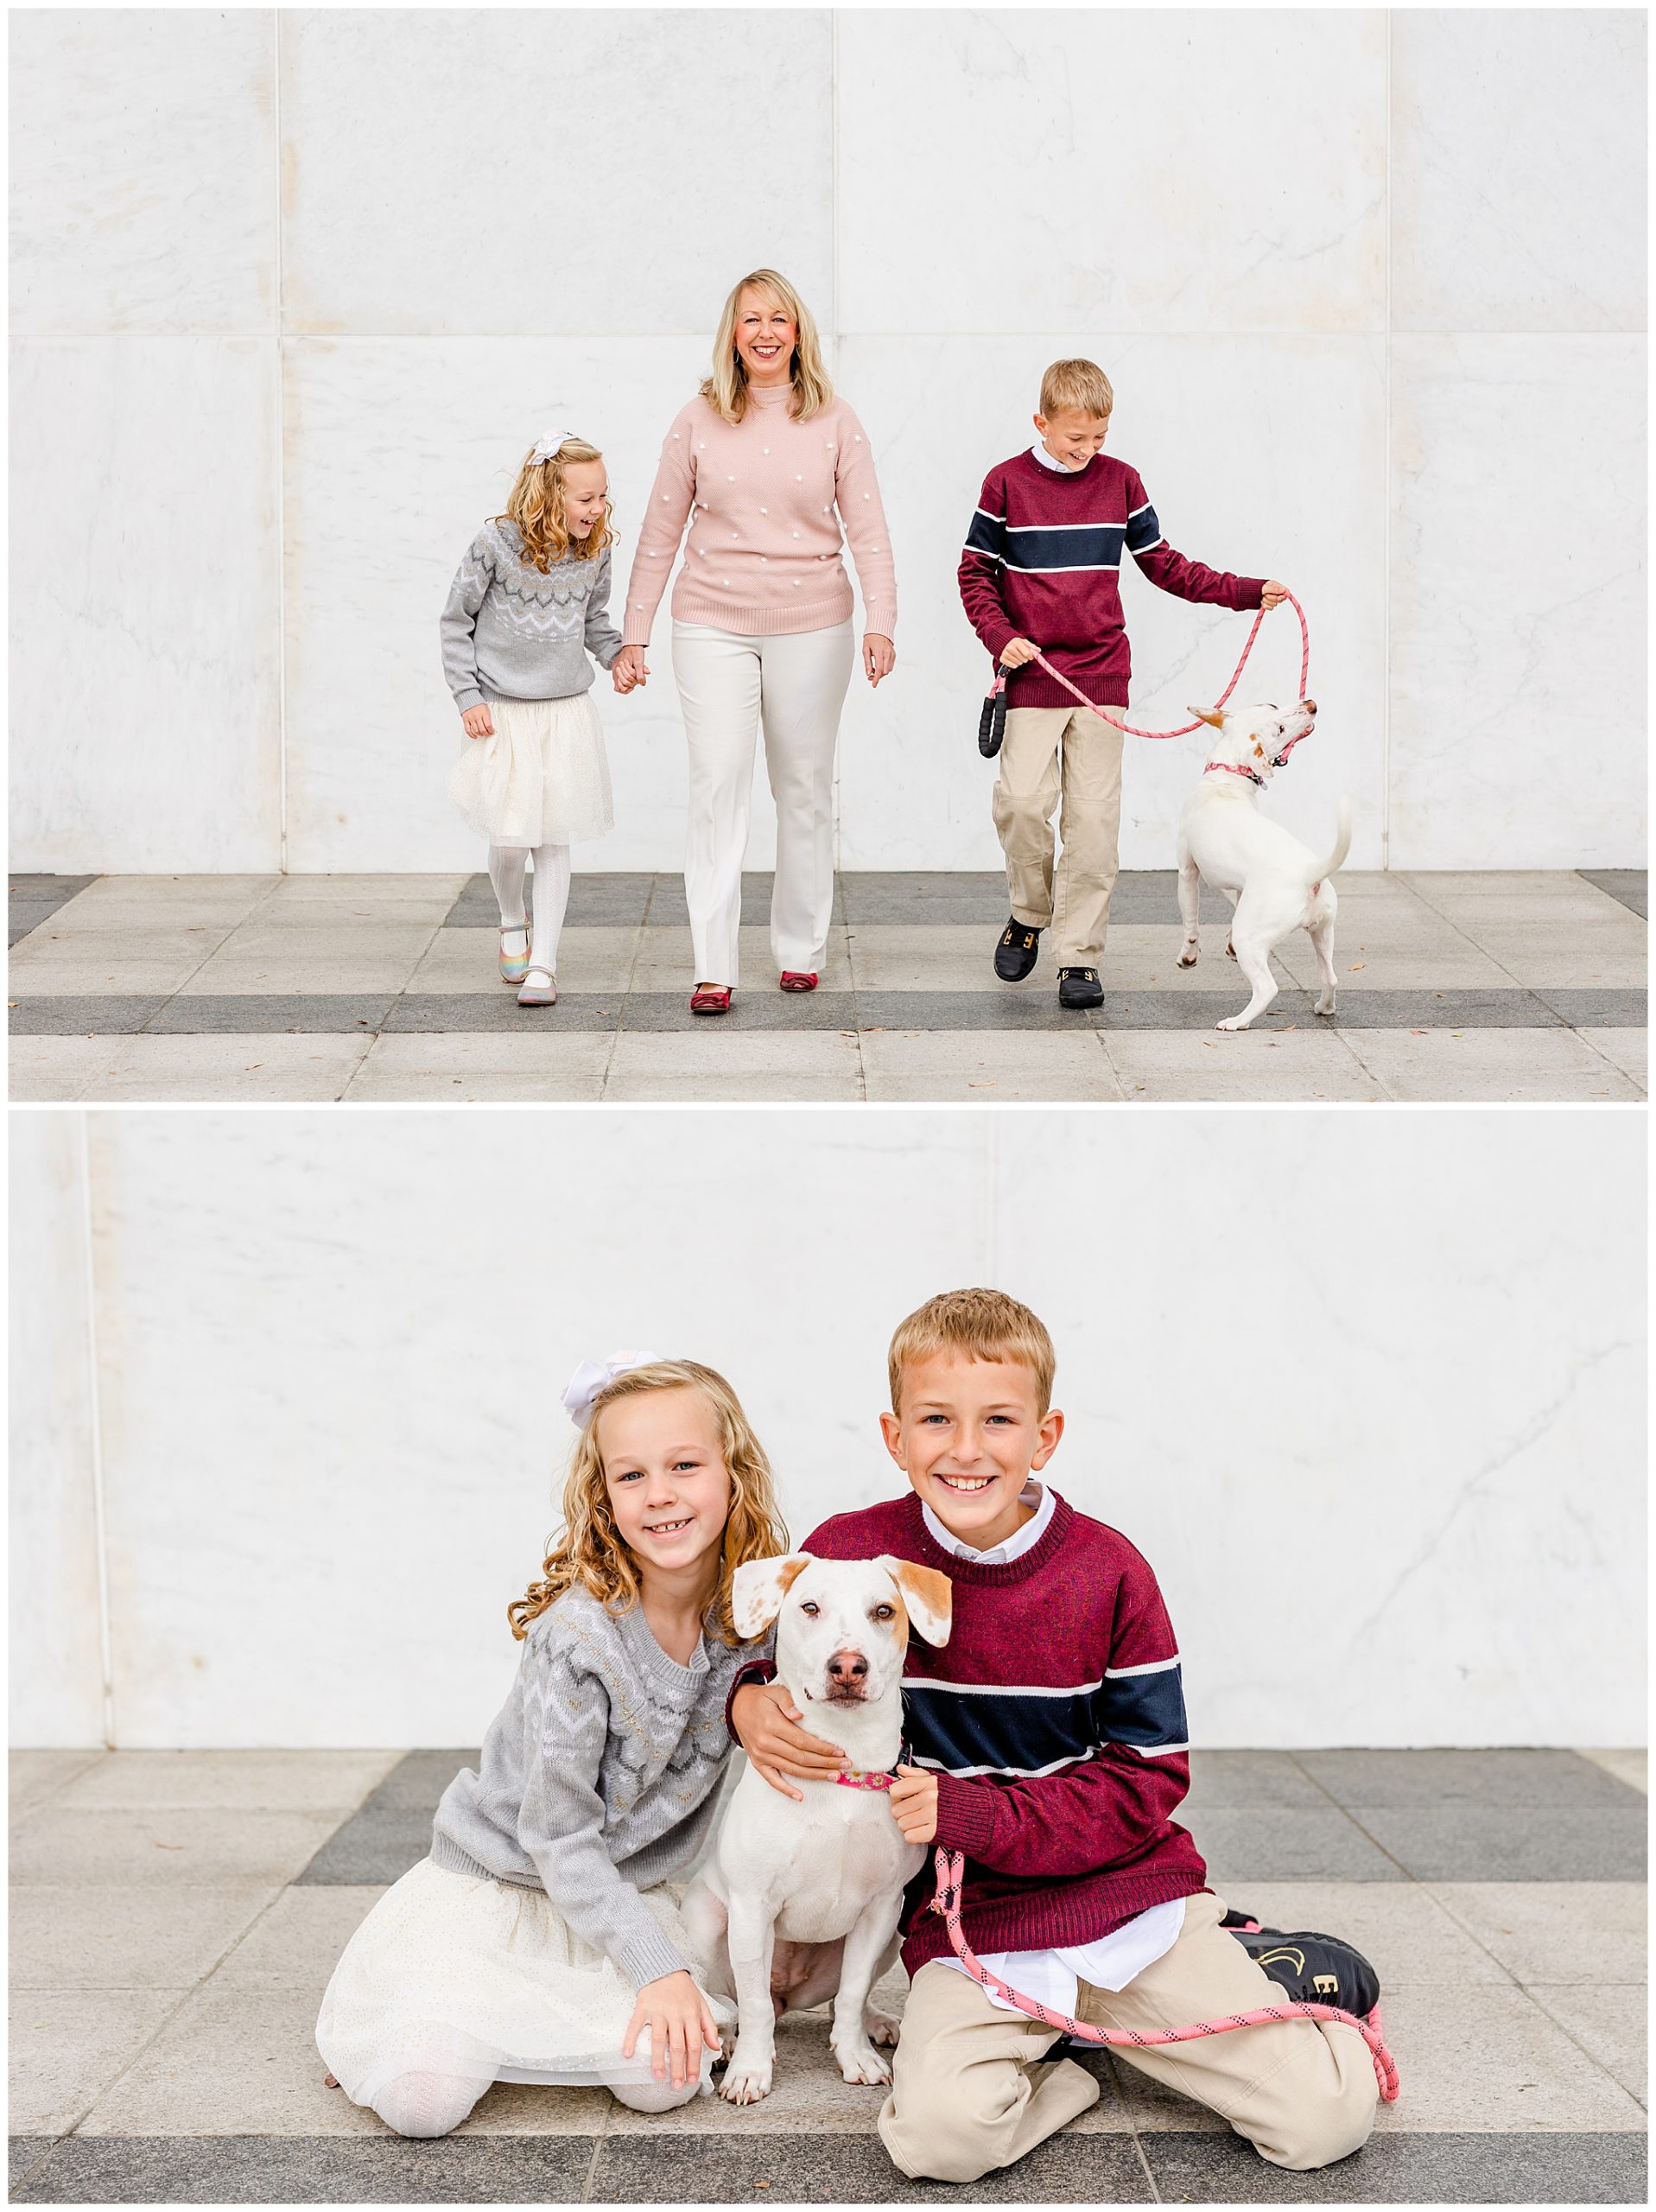 family photography session tips, family session tips, family photography tips, family photo shoot tips, ideas for family photos, Arlington Virginia photographer, family mini sessions, Rachel E.H. Photography, Washington D.C. photographer, mom with two kids, mom holding hands with daughter, kids smiling with dog